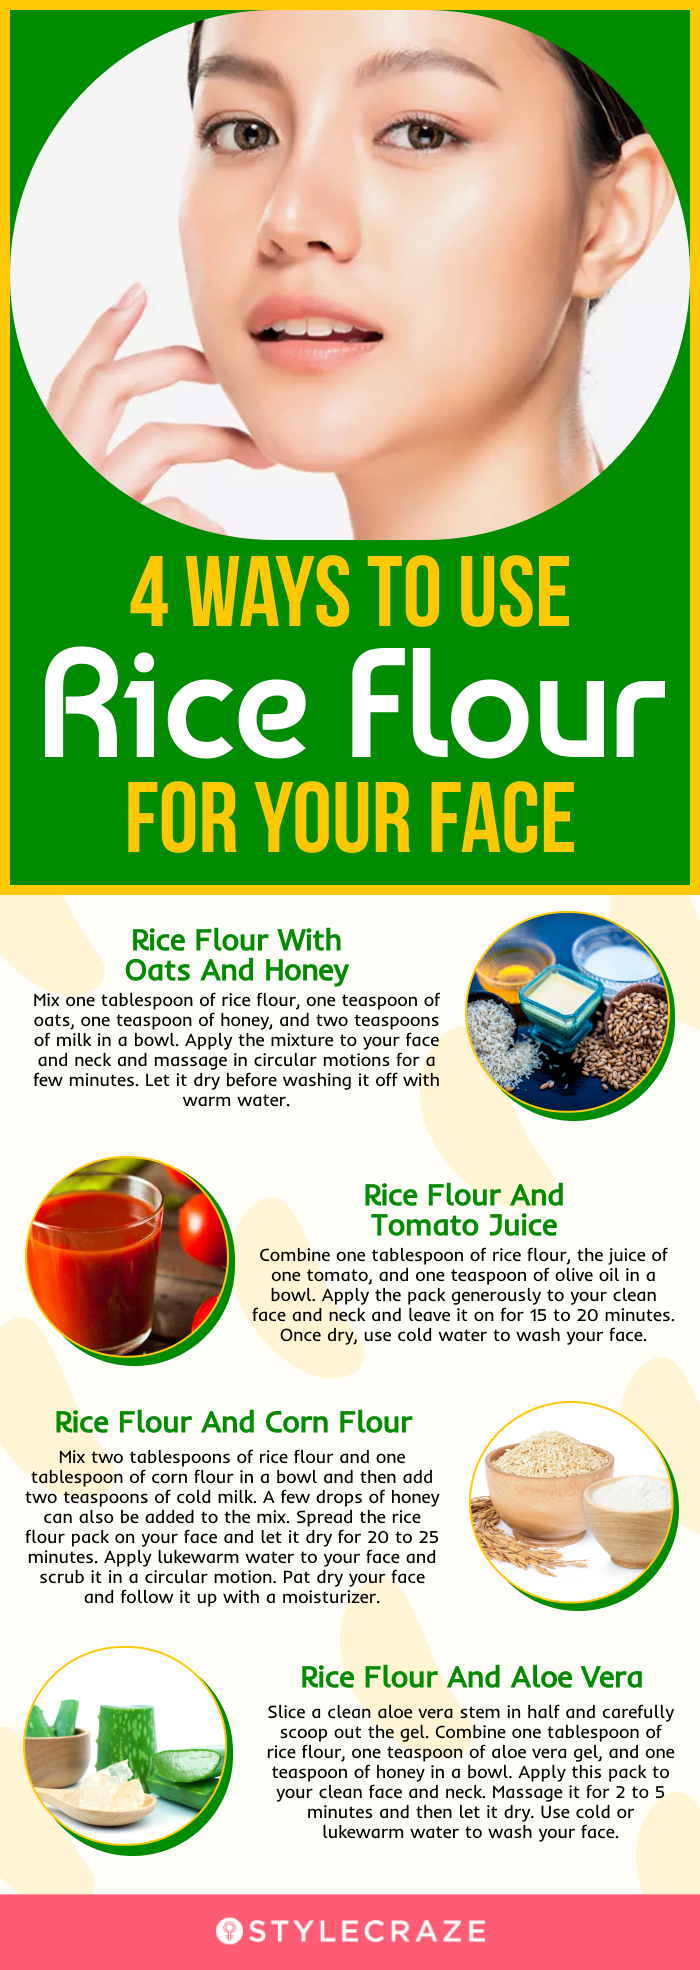 4 ways to use rice flour for your face (infographic)